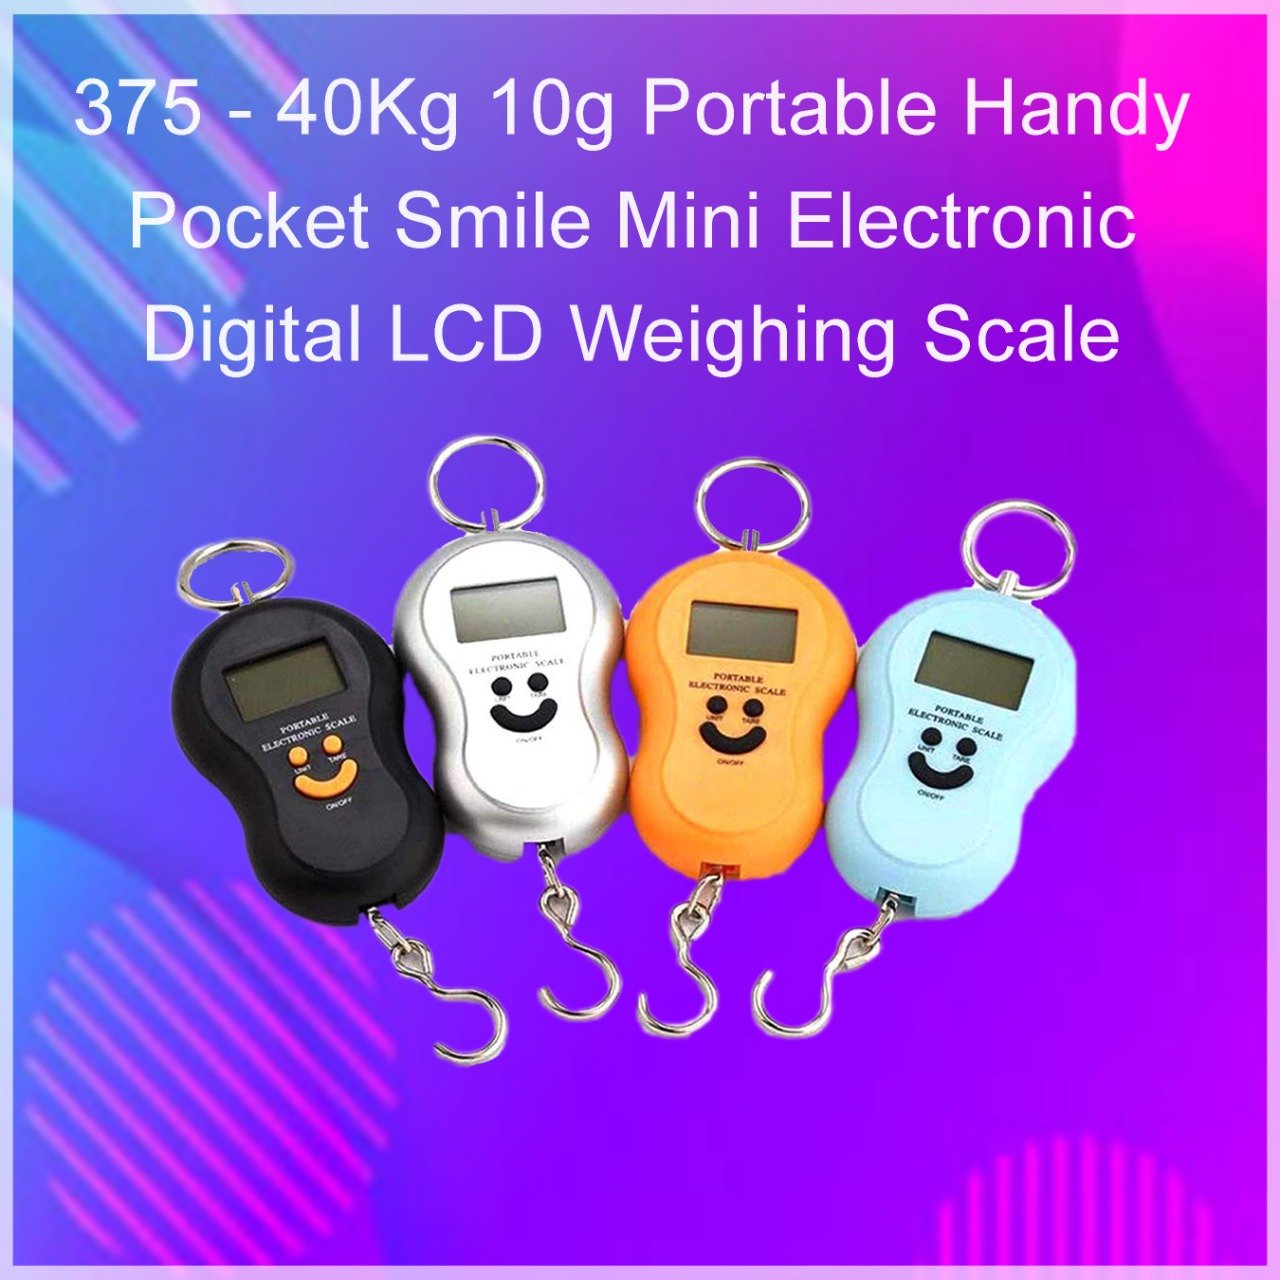 0375 -40Kg 10g Portable Handy Pocket Smile Mini Electronic Digital LCD Weighing Scale - SkyShopy